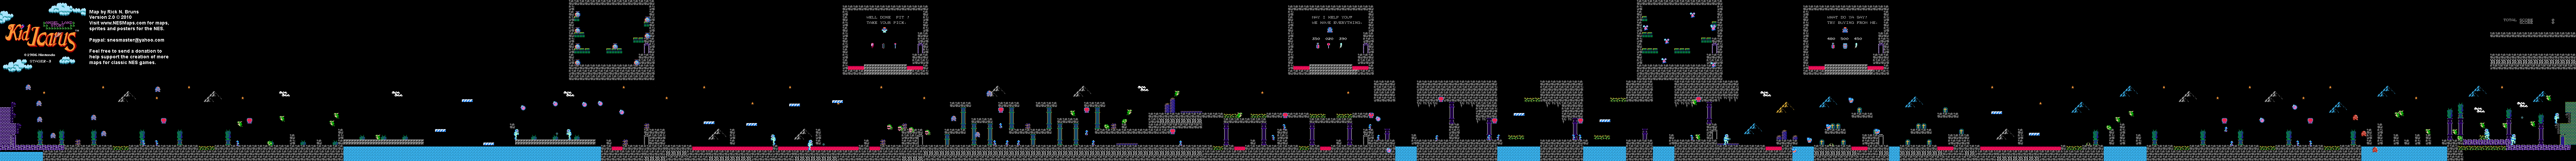 Kid Icarus - Stage 2-3 - NES Map